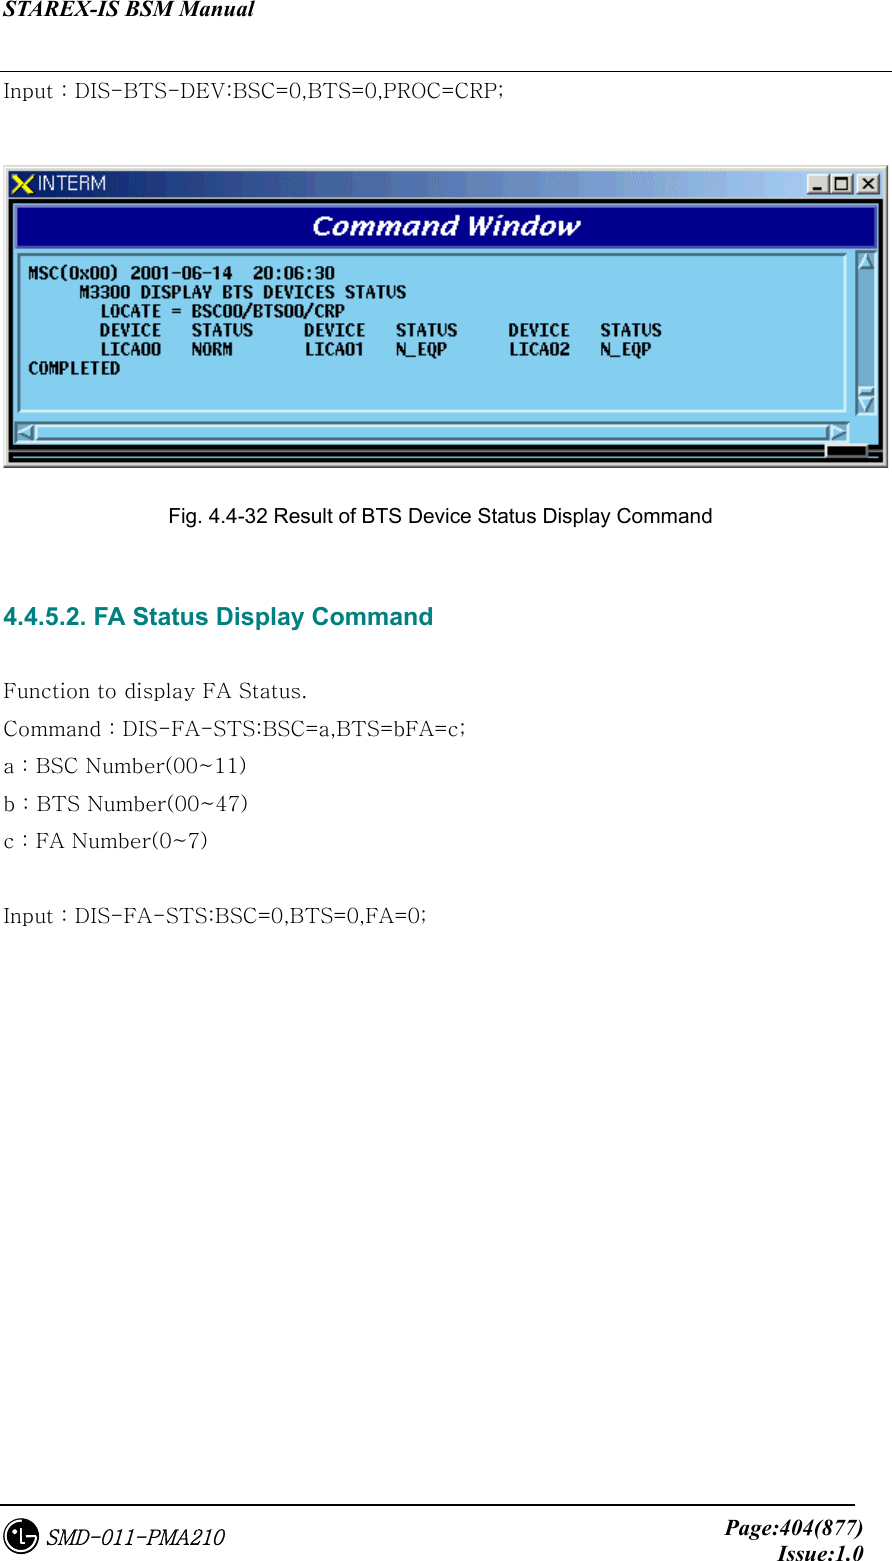 STAREX-IS BSM Manual     Page:404(877)Issue:1.0SMD-011-PMA210 Input : DIS-BTS-DEV:BSC=0,BTS=0,PROC=CRP;   Fig. 4.4-32 Result of BTS Device Status Display Command  4.4.5.2. FA Status Display Command  Function to display FA Status. Command : DIS-FA-STS:BSC=a,BTS=bFA=c; a : BSC Number(00~11) b : BTS Number(00~47) c : FA Number(0~7)  Input : DIS-FA-STS:BSC=0,BTS=0,FA=0; 